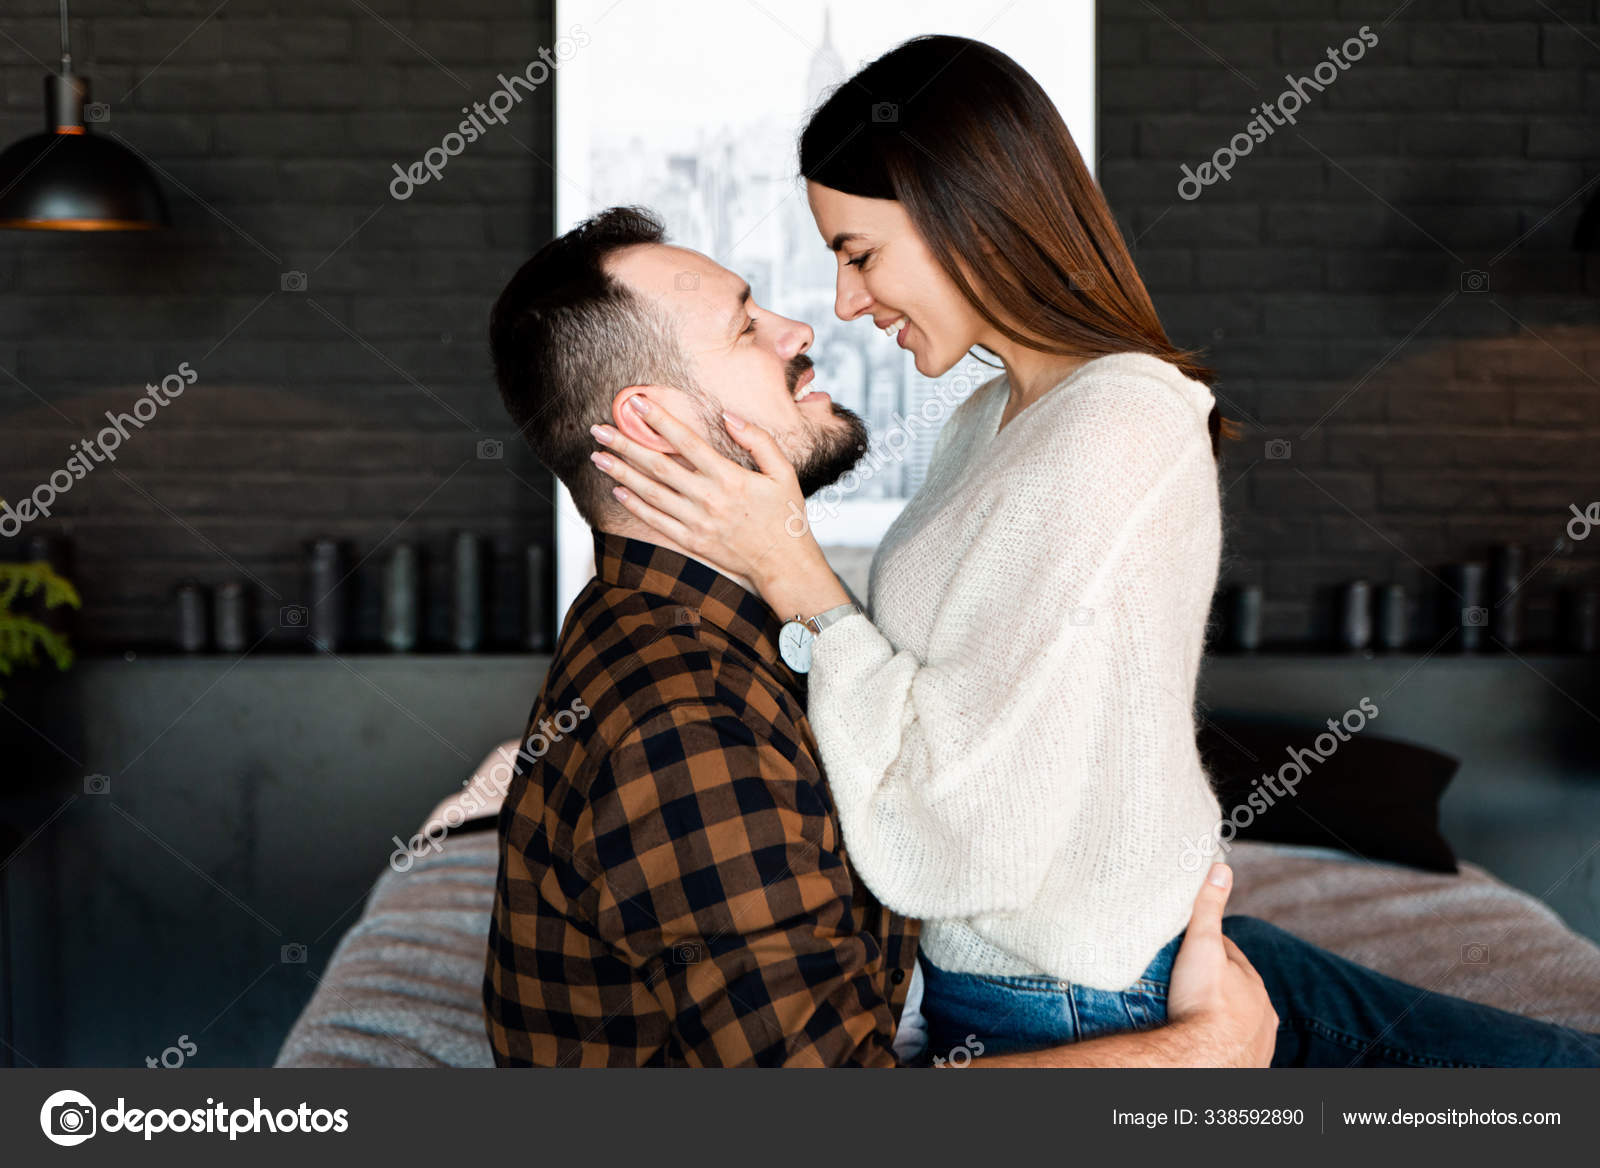 Romantic Young Couple Sitting Stock Image - Image of garden, romance:  163971615